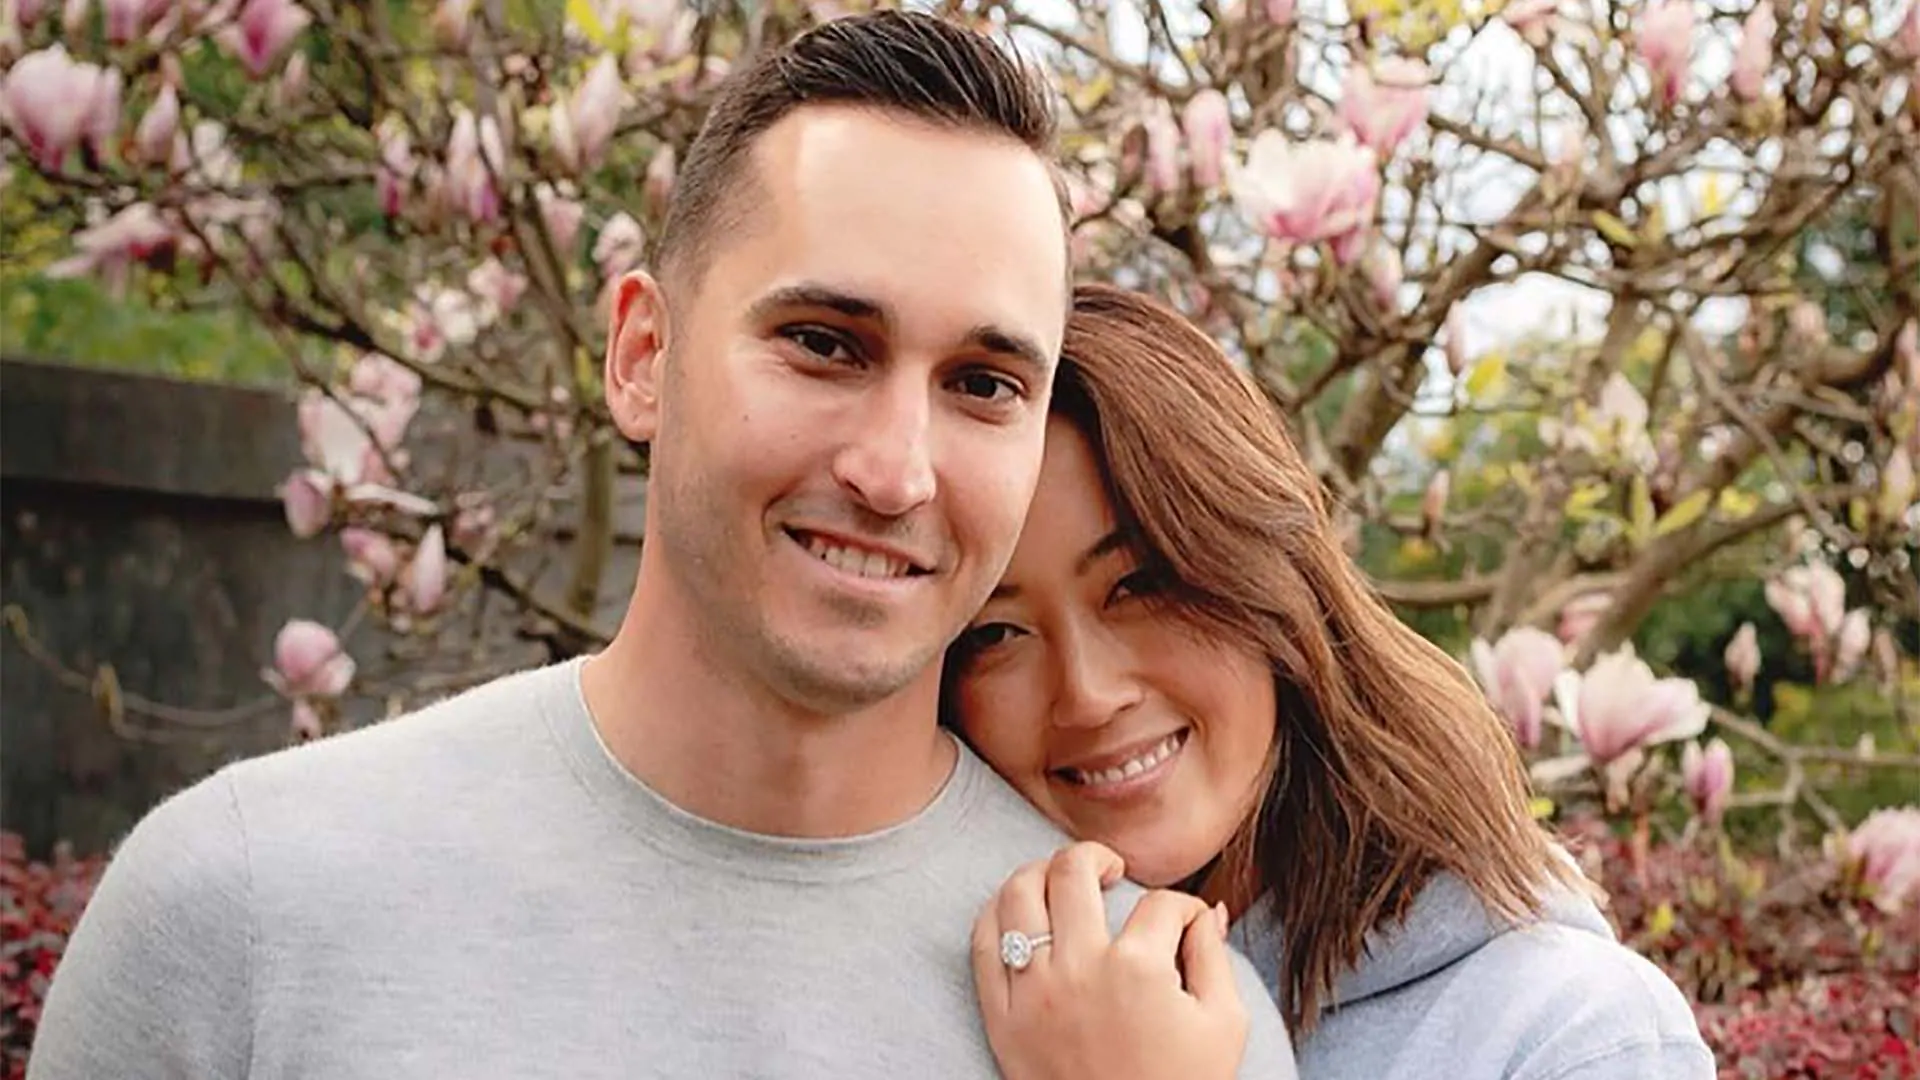 She said yes! Wie engaged to son of NBA legend